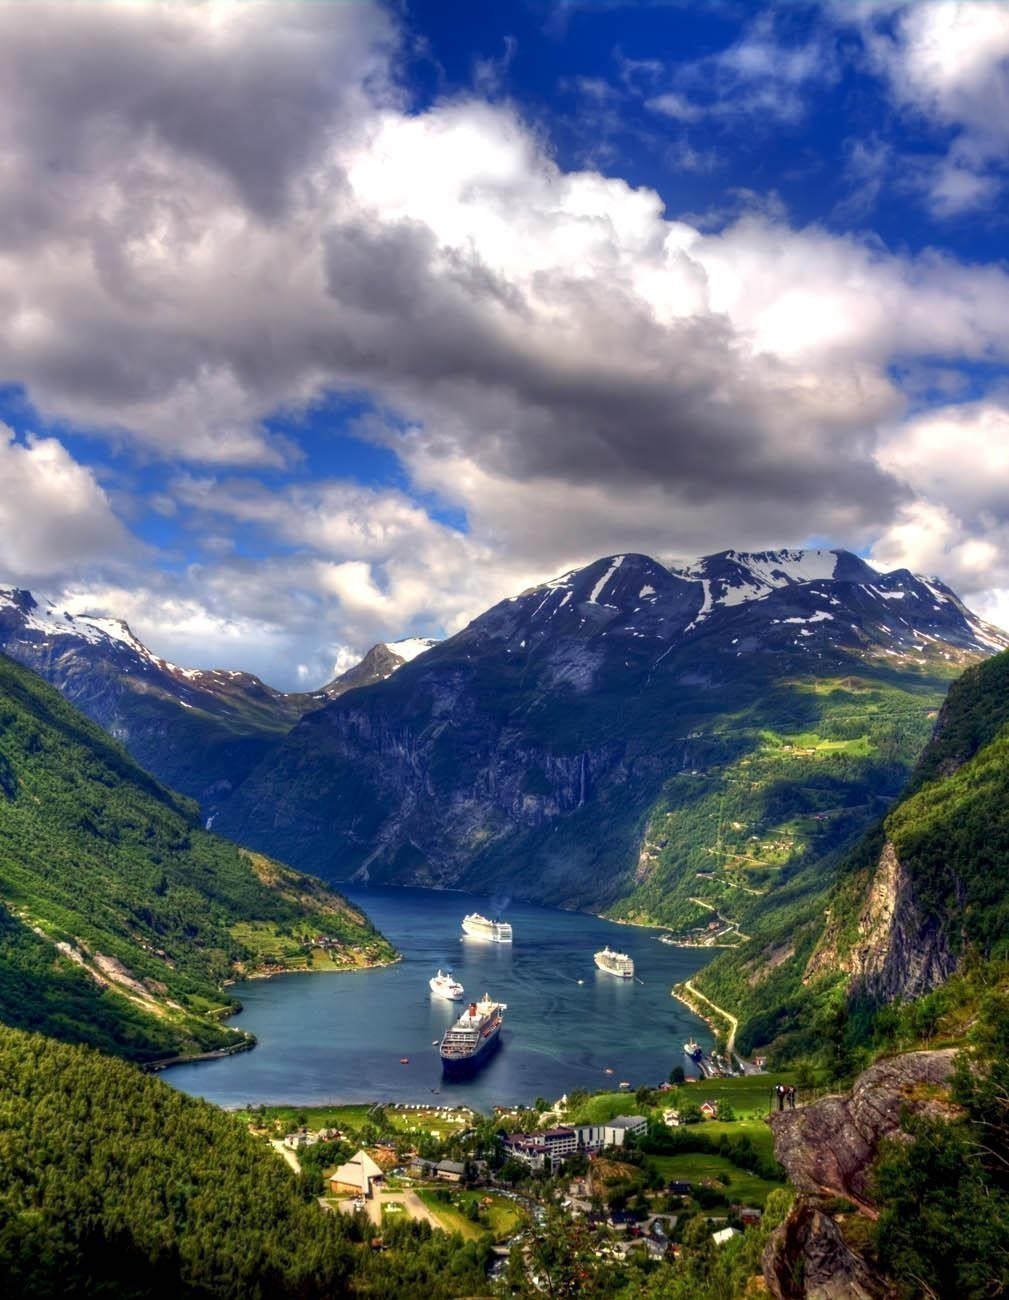 End of the famous Geiranger fjord | Norway Travel Guide